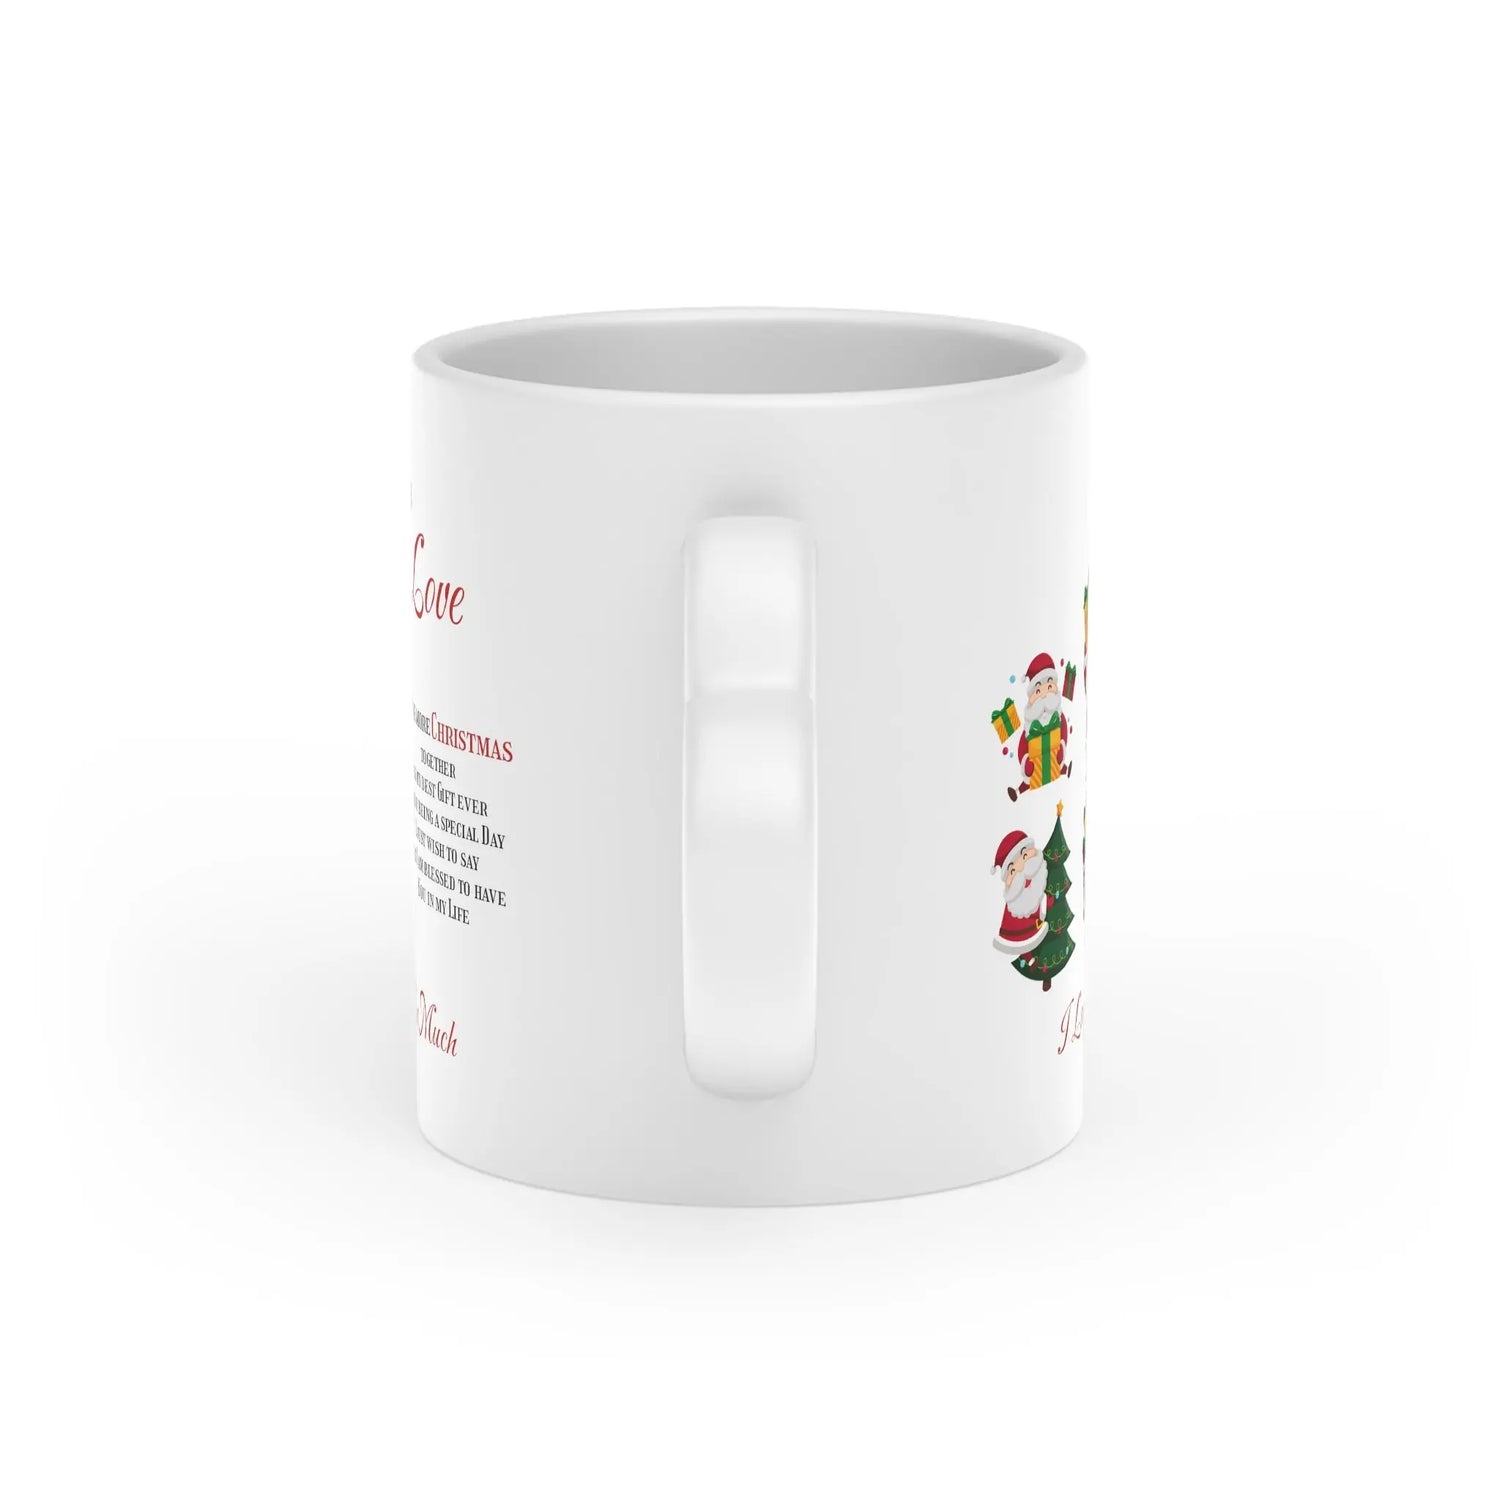 Heart-Shaped Mug To my Love One more Christmas together Home-clothes-jewelry